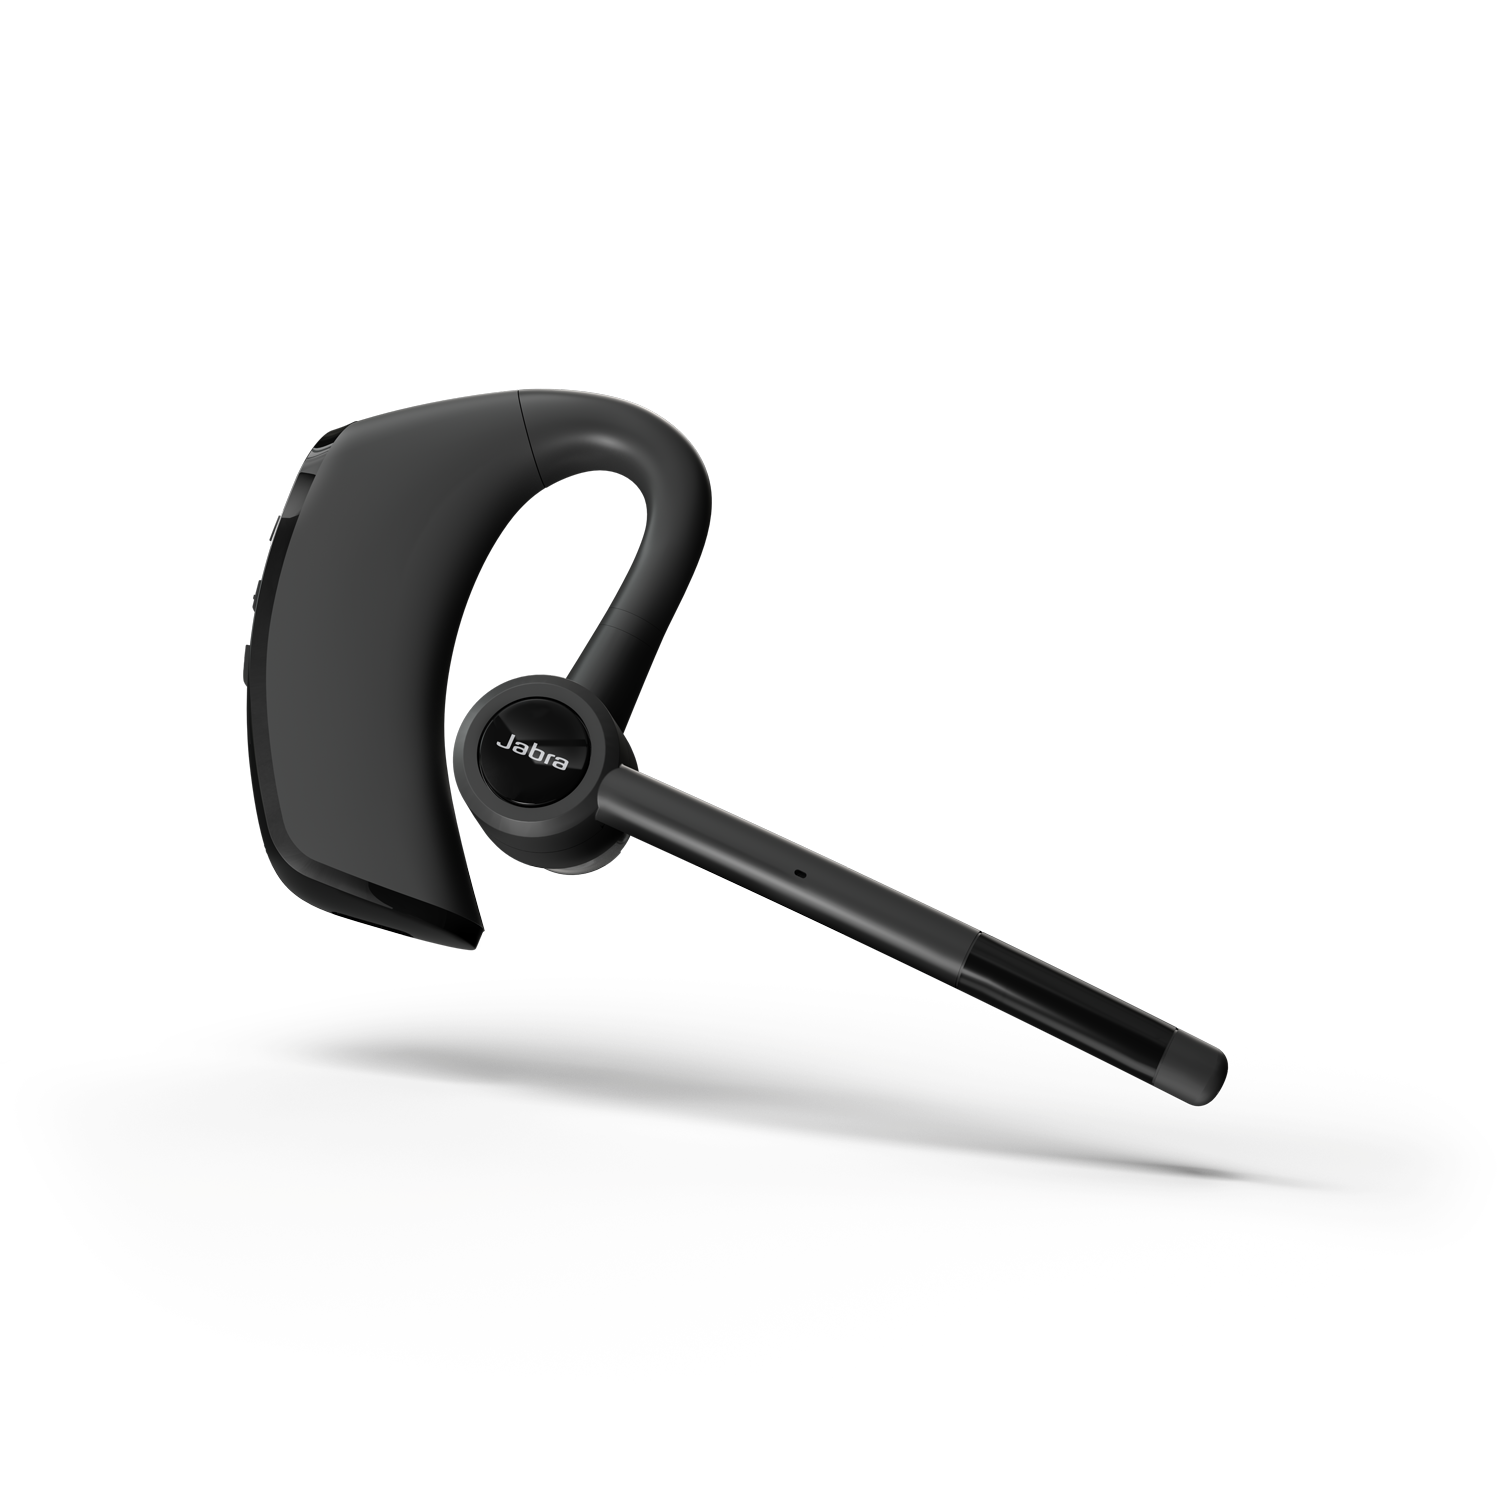 microphones Premium Bluetooth® with noise-cancelling headset 2